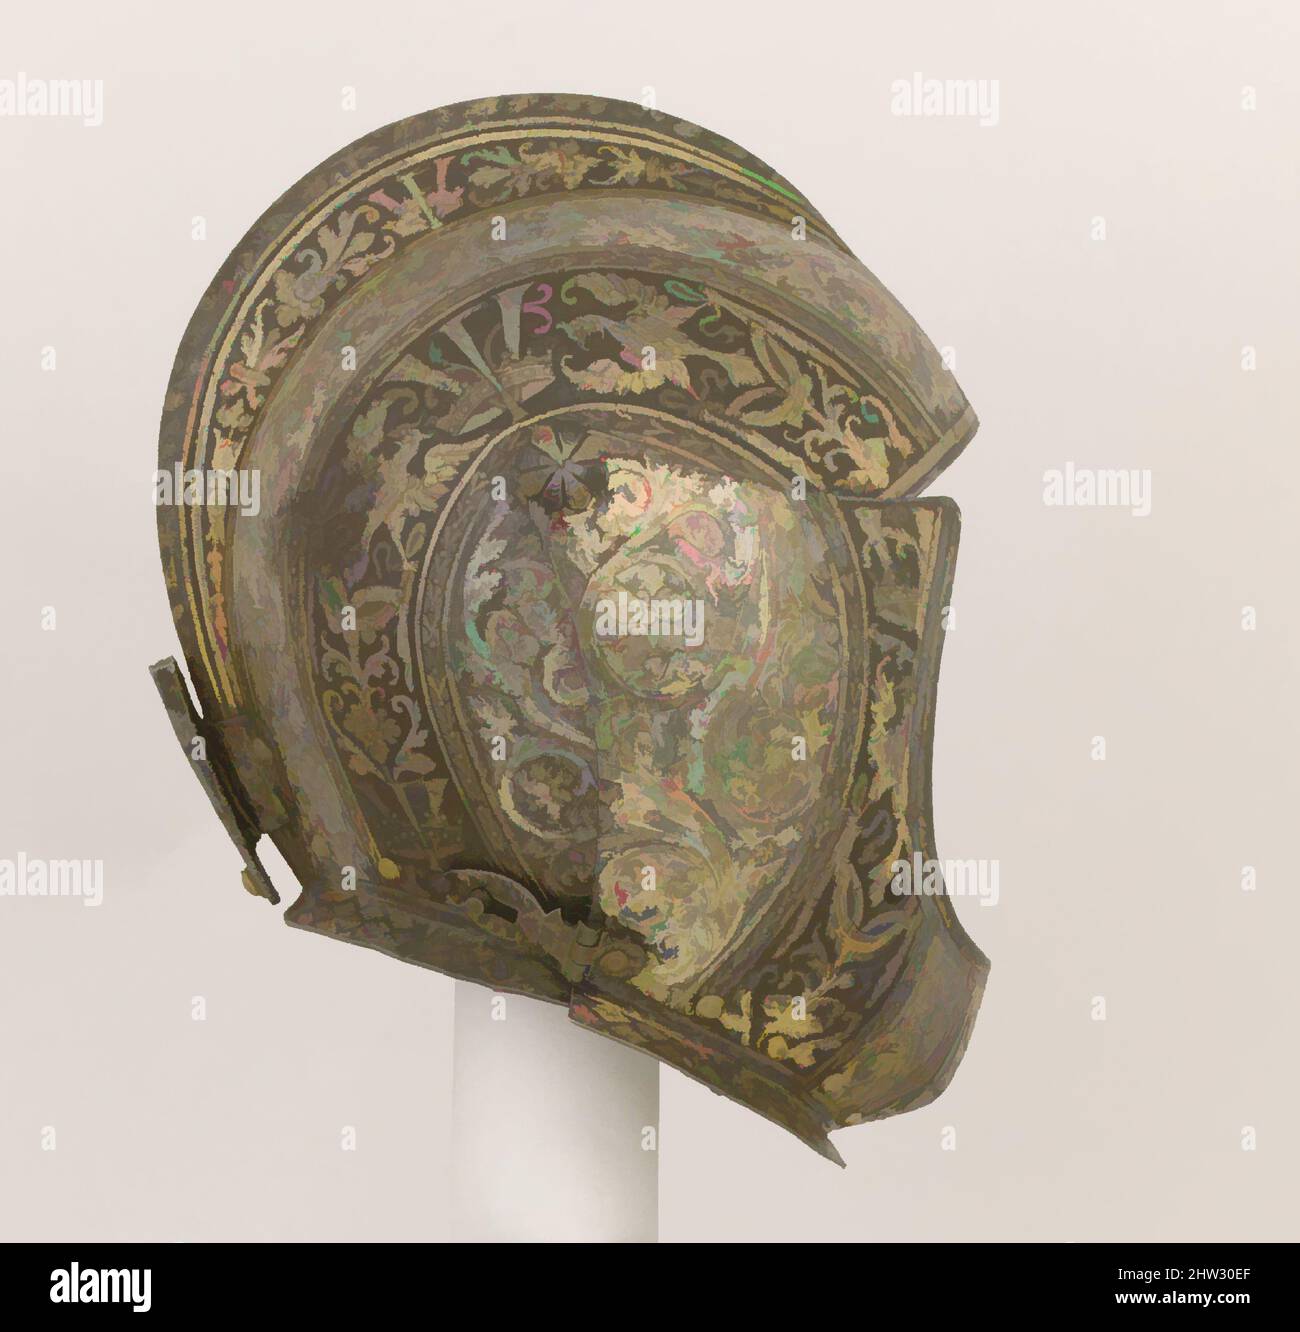 Art inspired by Close-Helmet of Vicenzo I Gonzaga (1562–1612), Duke of Mantua, ca. 1587, Milan, Italian, Milan, Steel, gold, silver, Helmet (a); H. 13 in. (33 cm); W. 8 3/4 in. (22.2 cm); D. 9 1/2 in. (24.1 cm); Wt. 5 lb. 2.4 oz. (2336 g); brim (b); H. 3 in. (7.6 cm); W. 8 3/4 in. (22., Classic works modernized by Artotop with a splash of modernity. Shapes, color and value, eye-catching visual impact on art. Emotions through freedom of artworks in a contemporary way. A timeless message pursuing a wildly creative new direction. Artists turning to the digital medium and creating the Artotop NFT Stock Photo